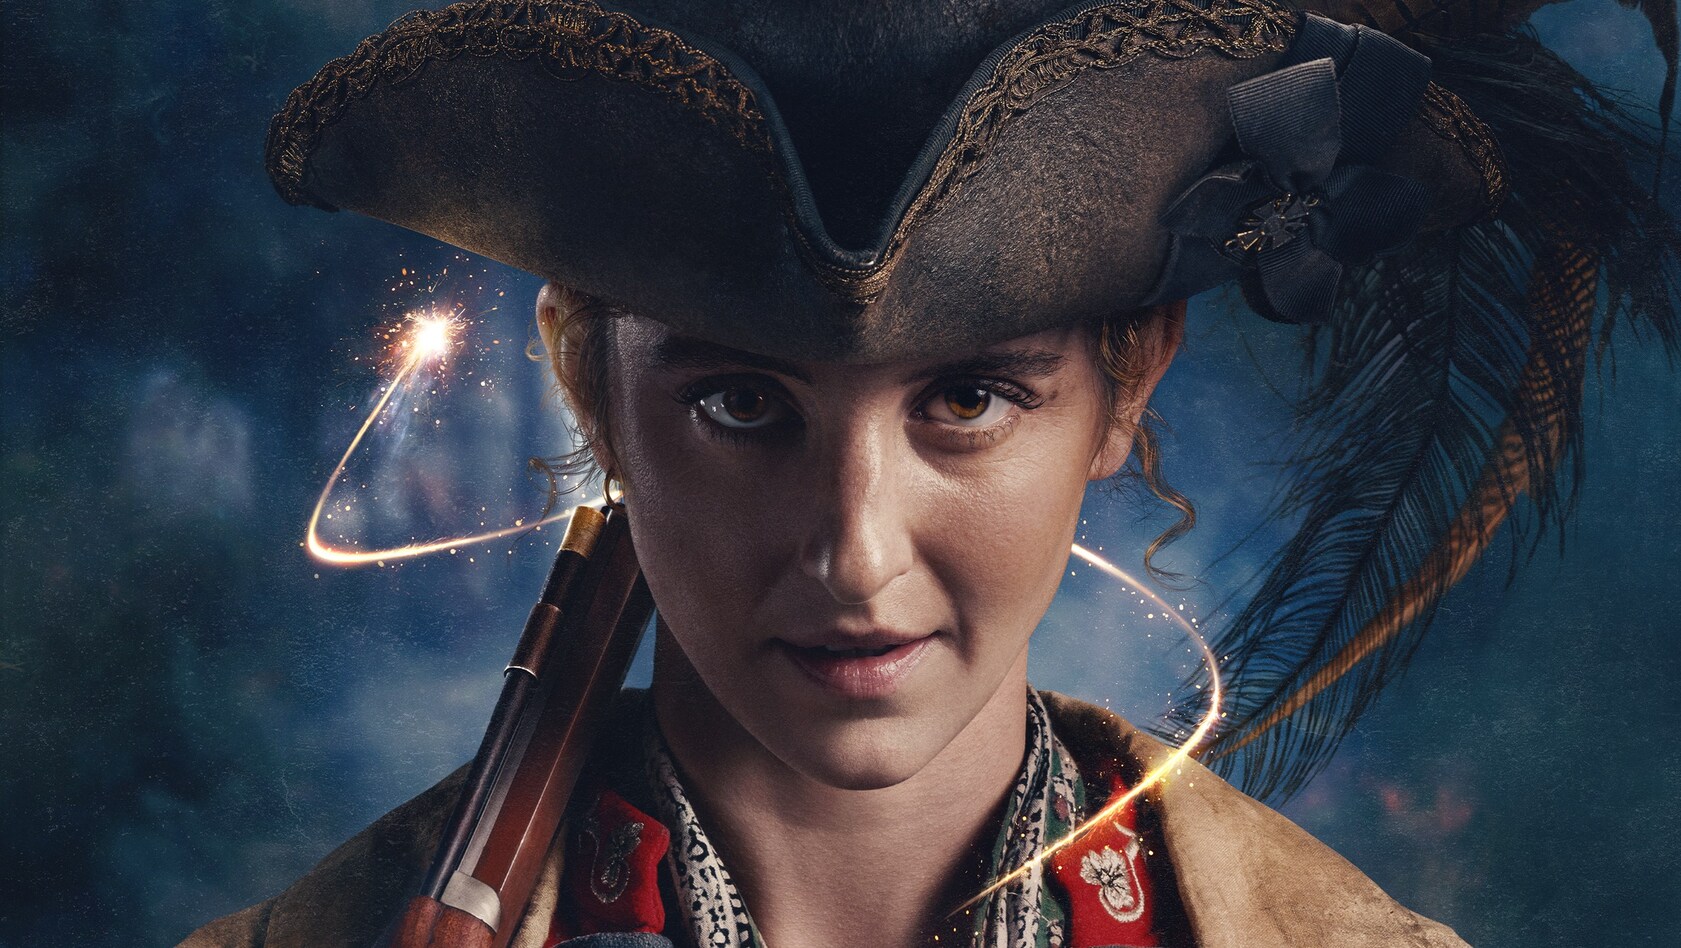 DISNEY+ ANNOUNCES ACTION-ADVENTURE FANTASY SERIES “RENEGADE NELL” WILL PREMIERE MARCH 29 – KEY ART NOW AVAILABLE